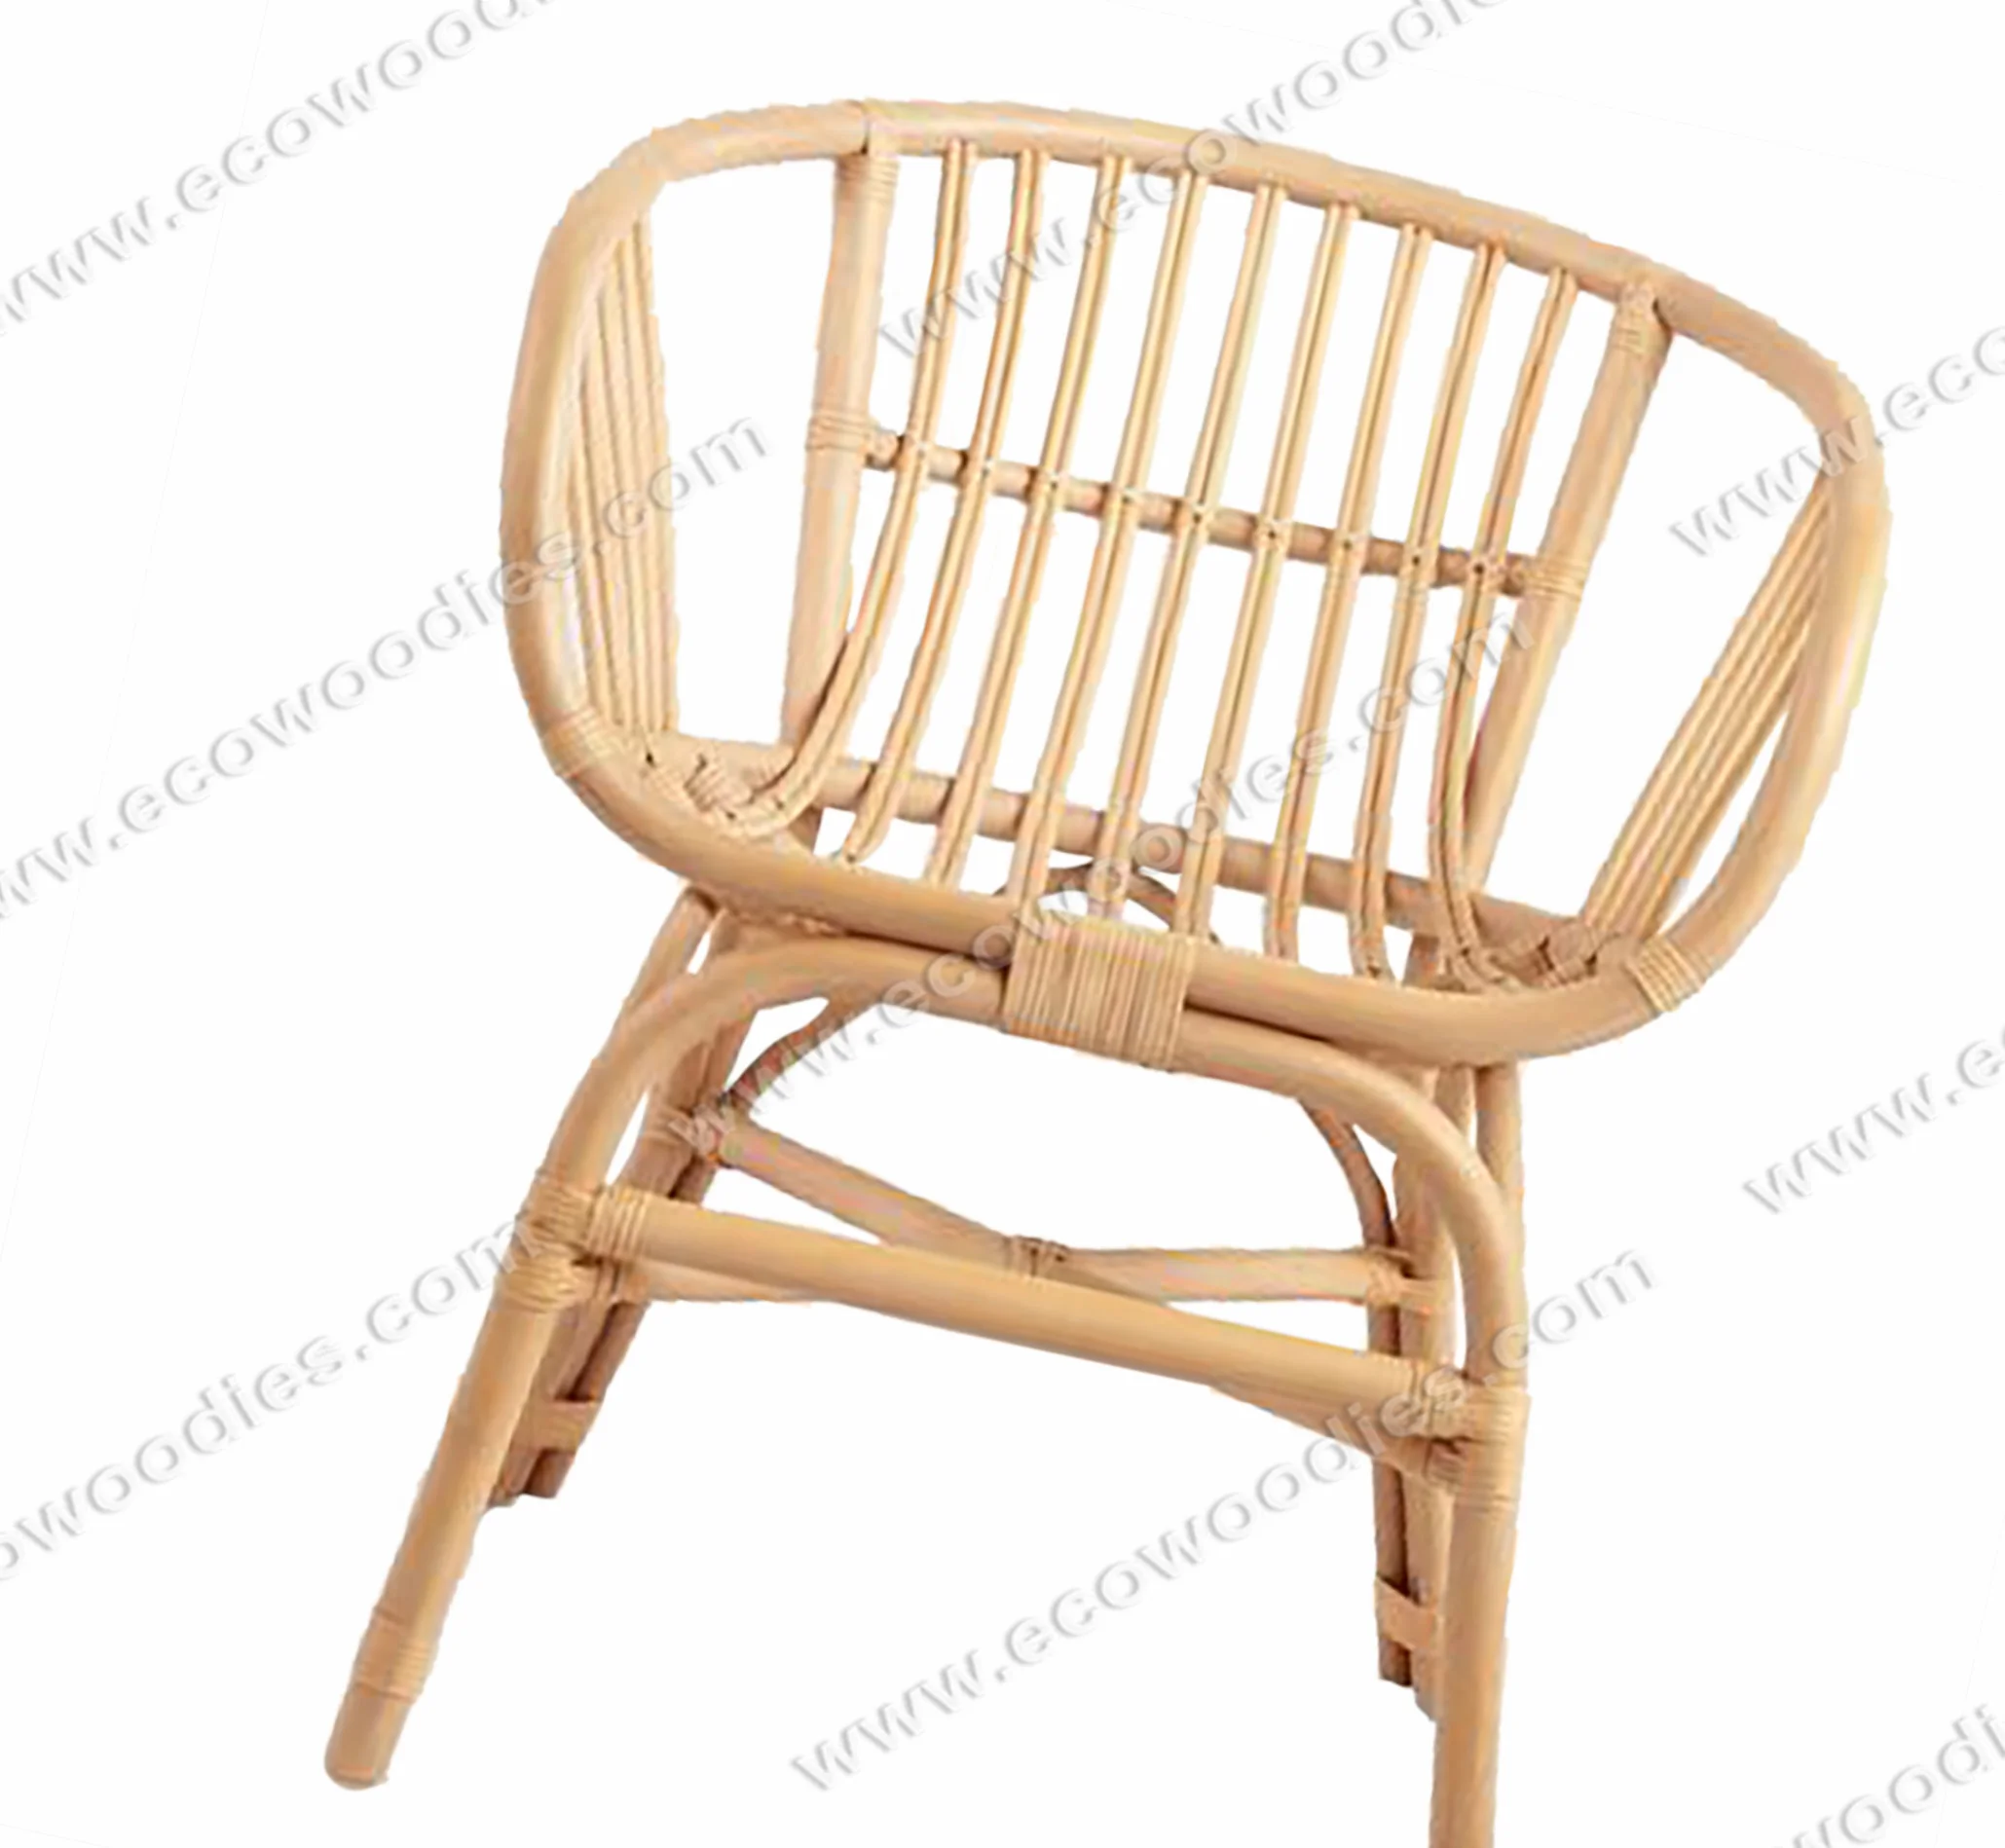 Cheap Wholesale Bamboo Leisure Office Chair Restaurant Furniture Sets Chiavari Dining Restaurant Sets Living Room Sofas Bedroom Buy Salon Chair Kids Barber Chair Eyelash Chair Wood Dining Chairs Toilet Chair Vintage